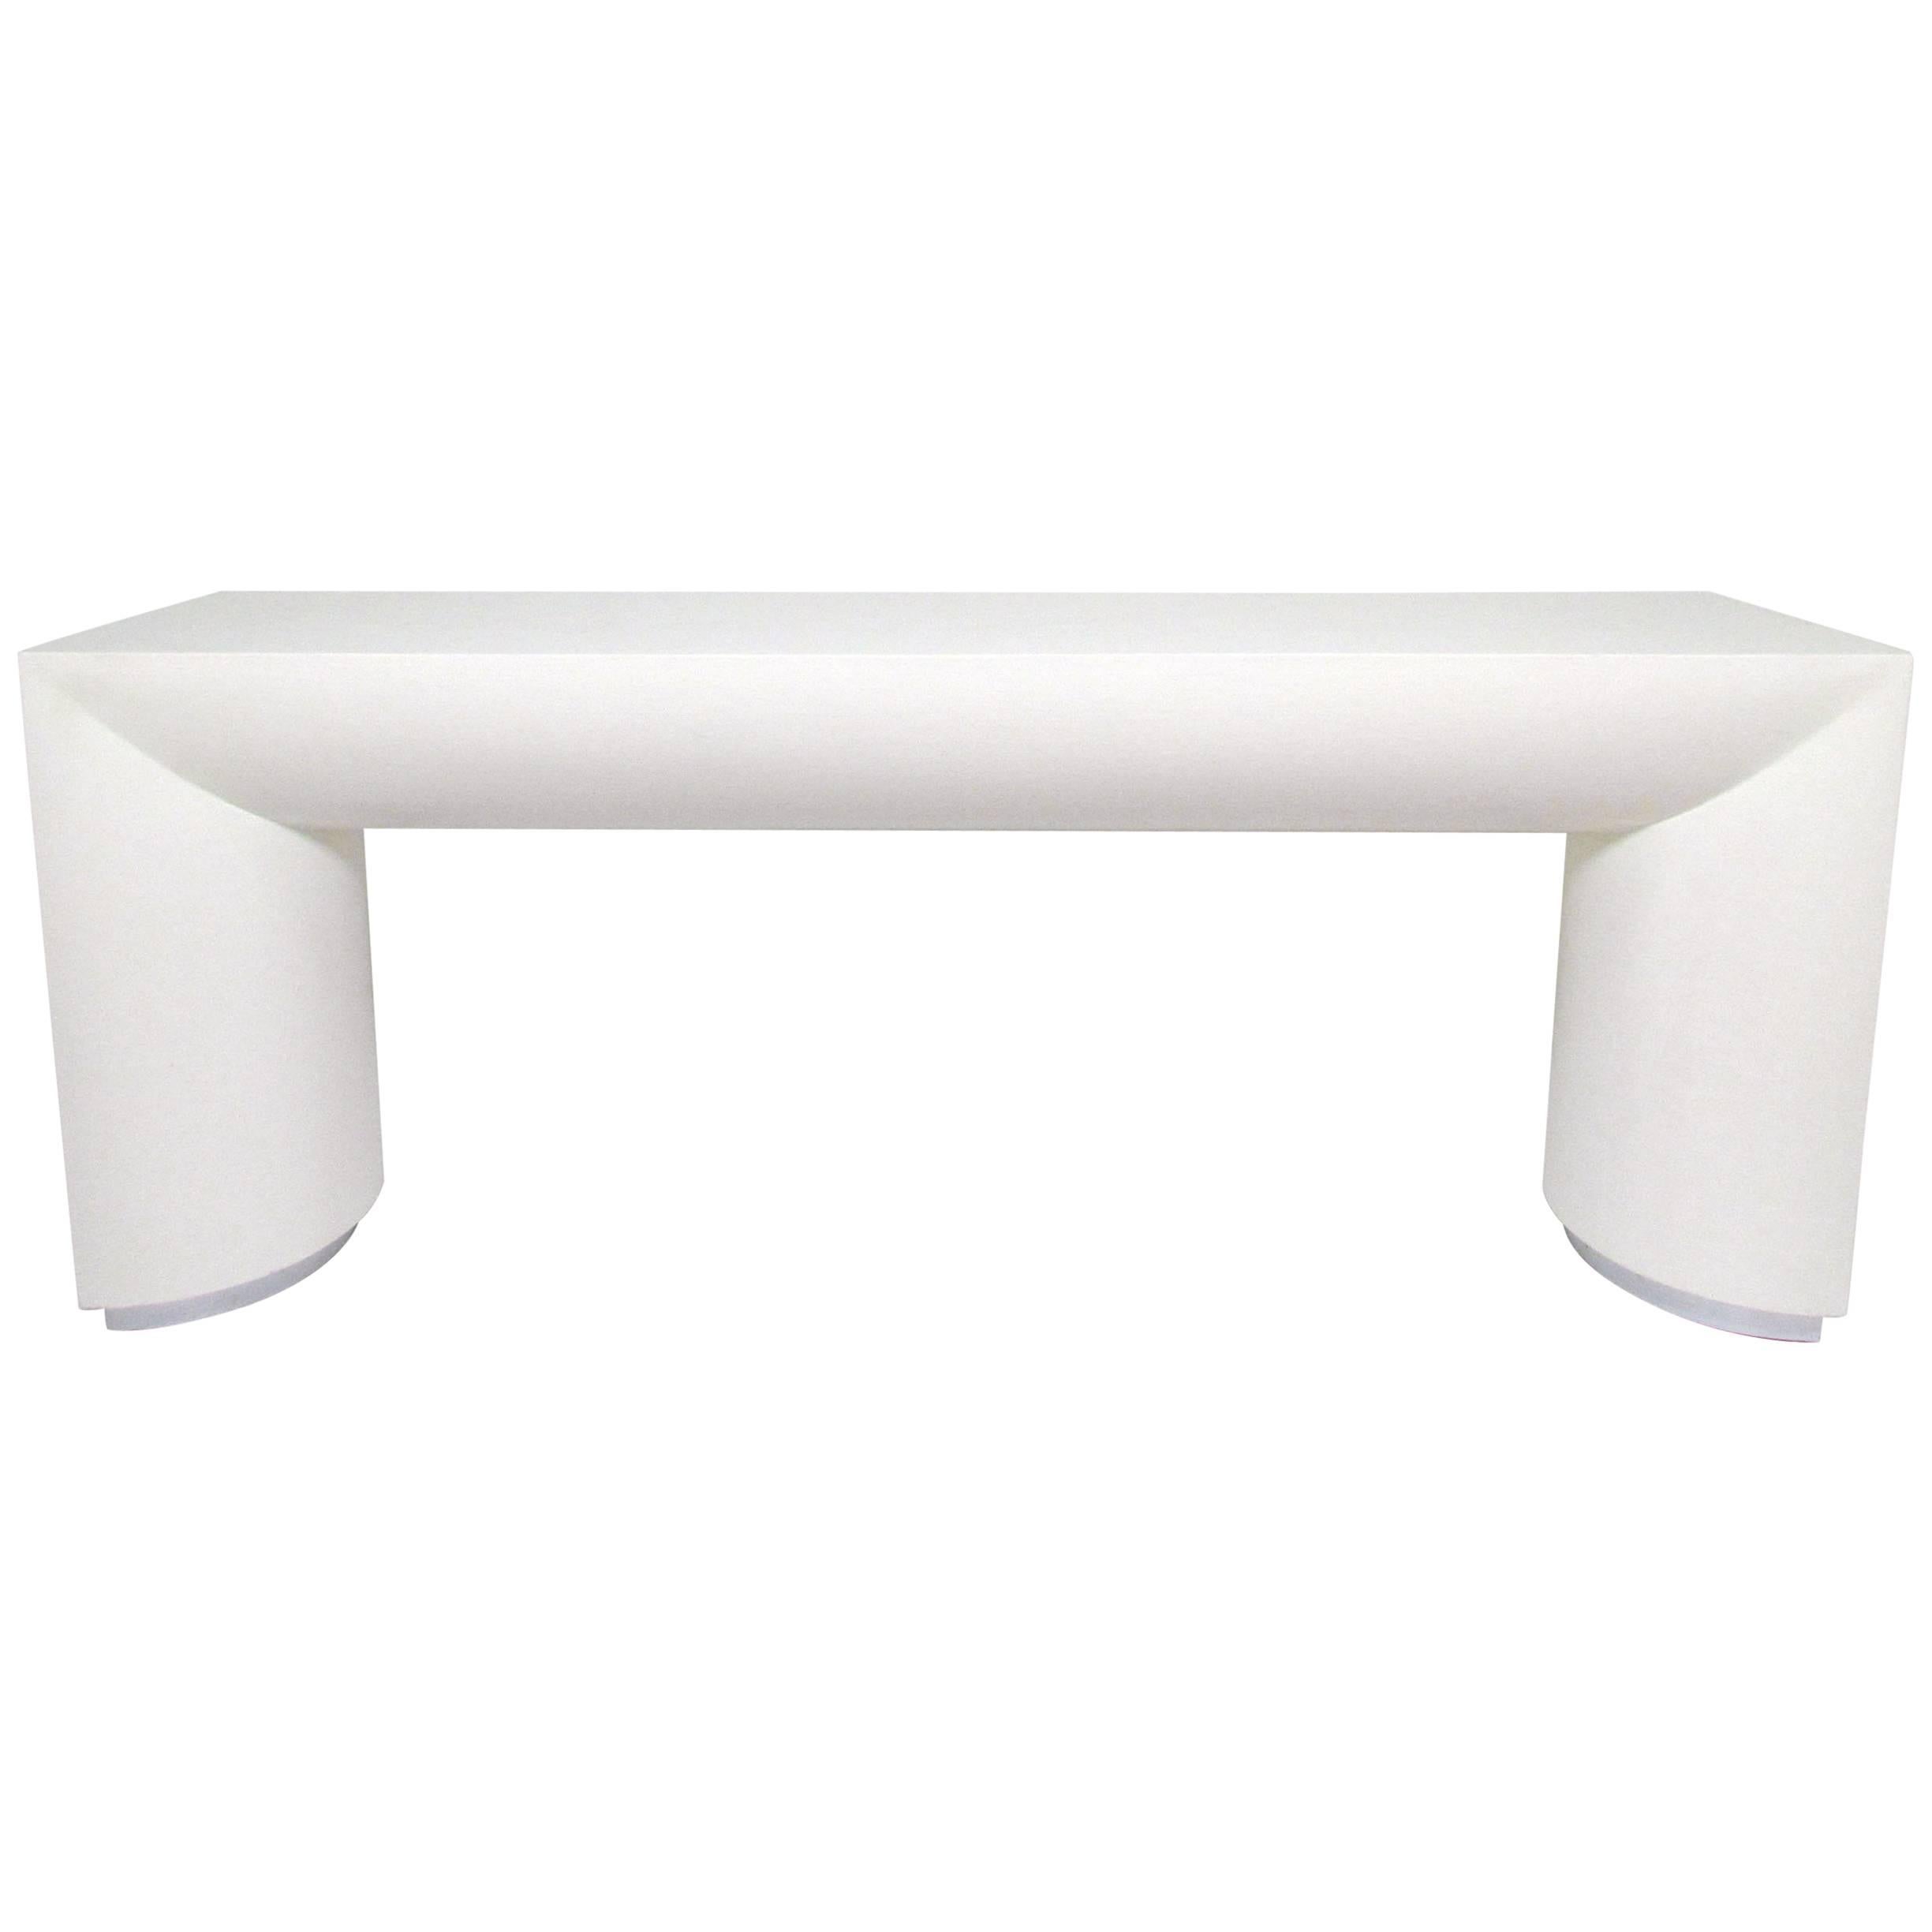 Lacquered Linen Jay Spectre for Century Furniture Console Table, circa 1970s